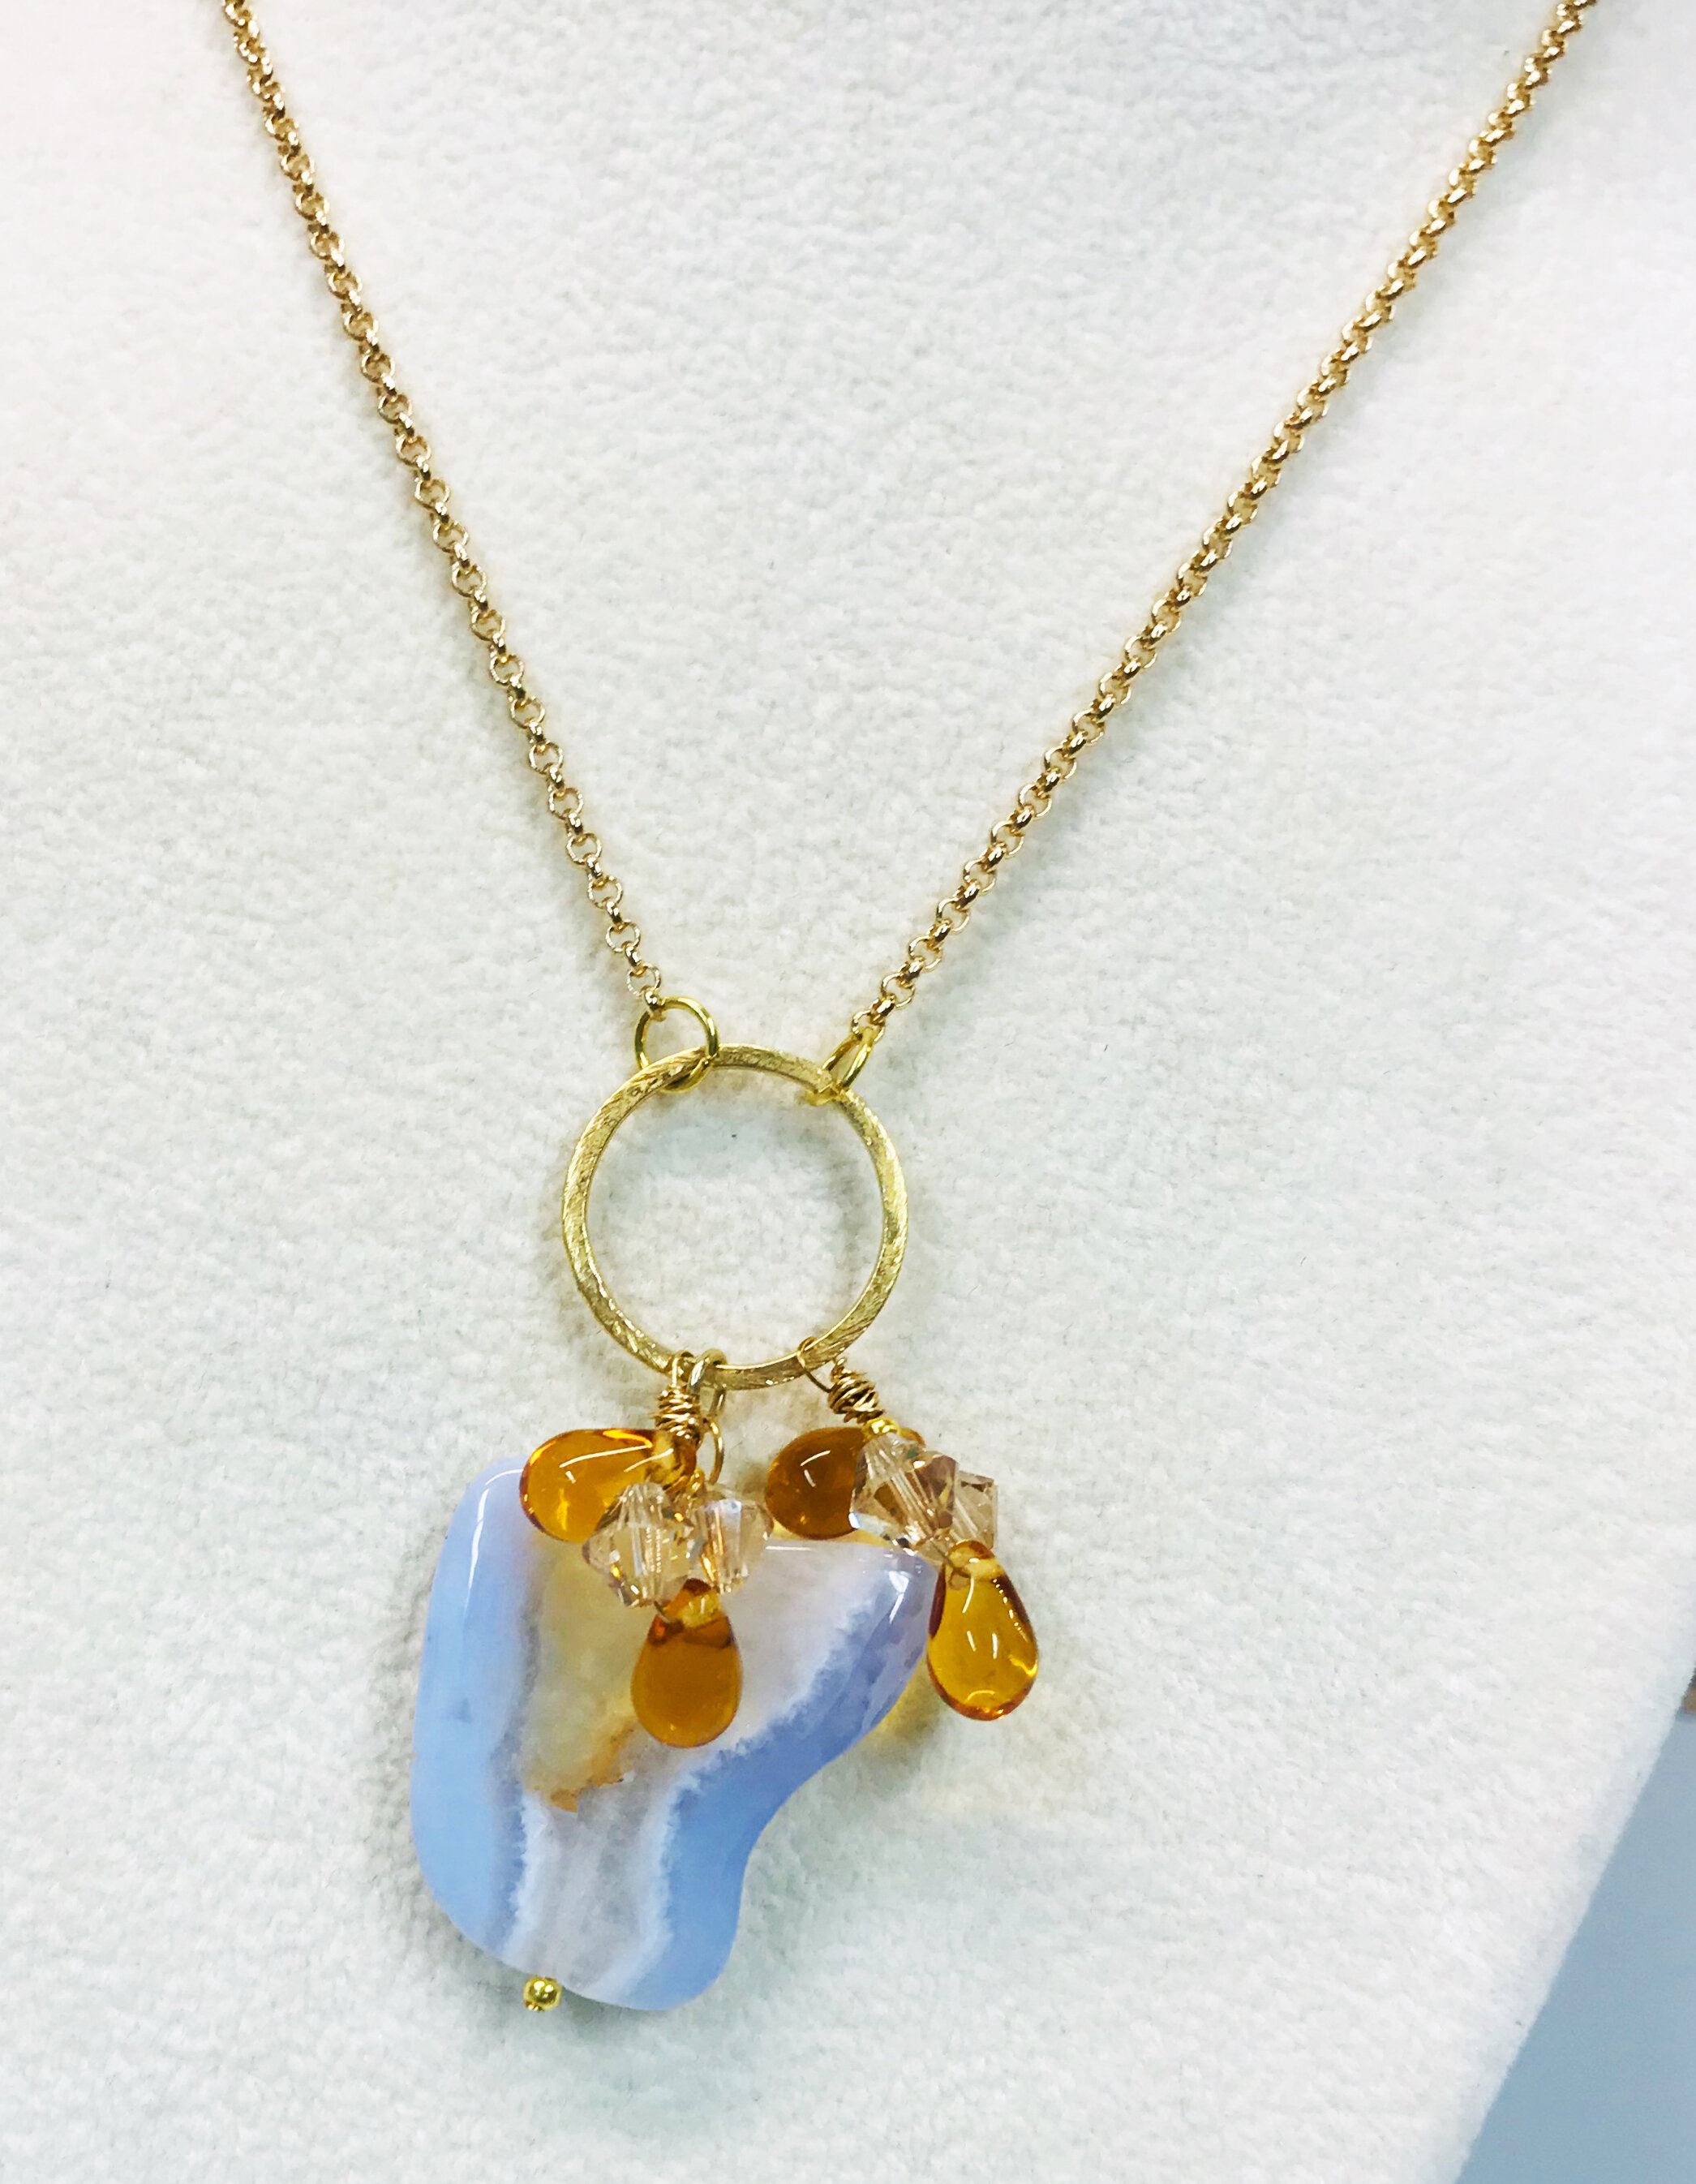 Blue chalcedony necklace, 14k gold filled. N275. | Jewelry By Renata